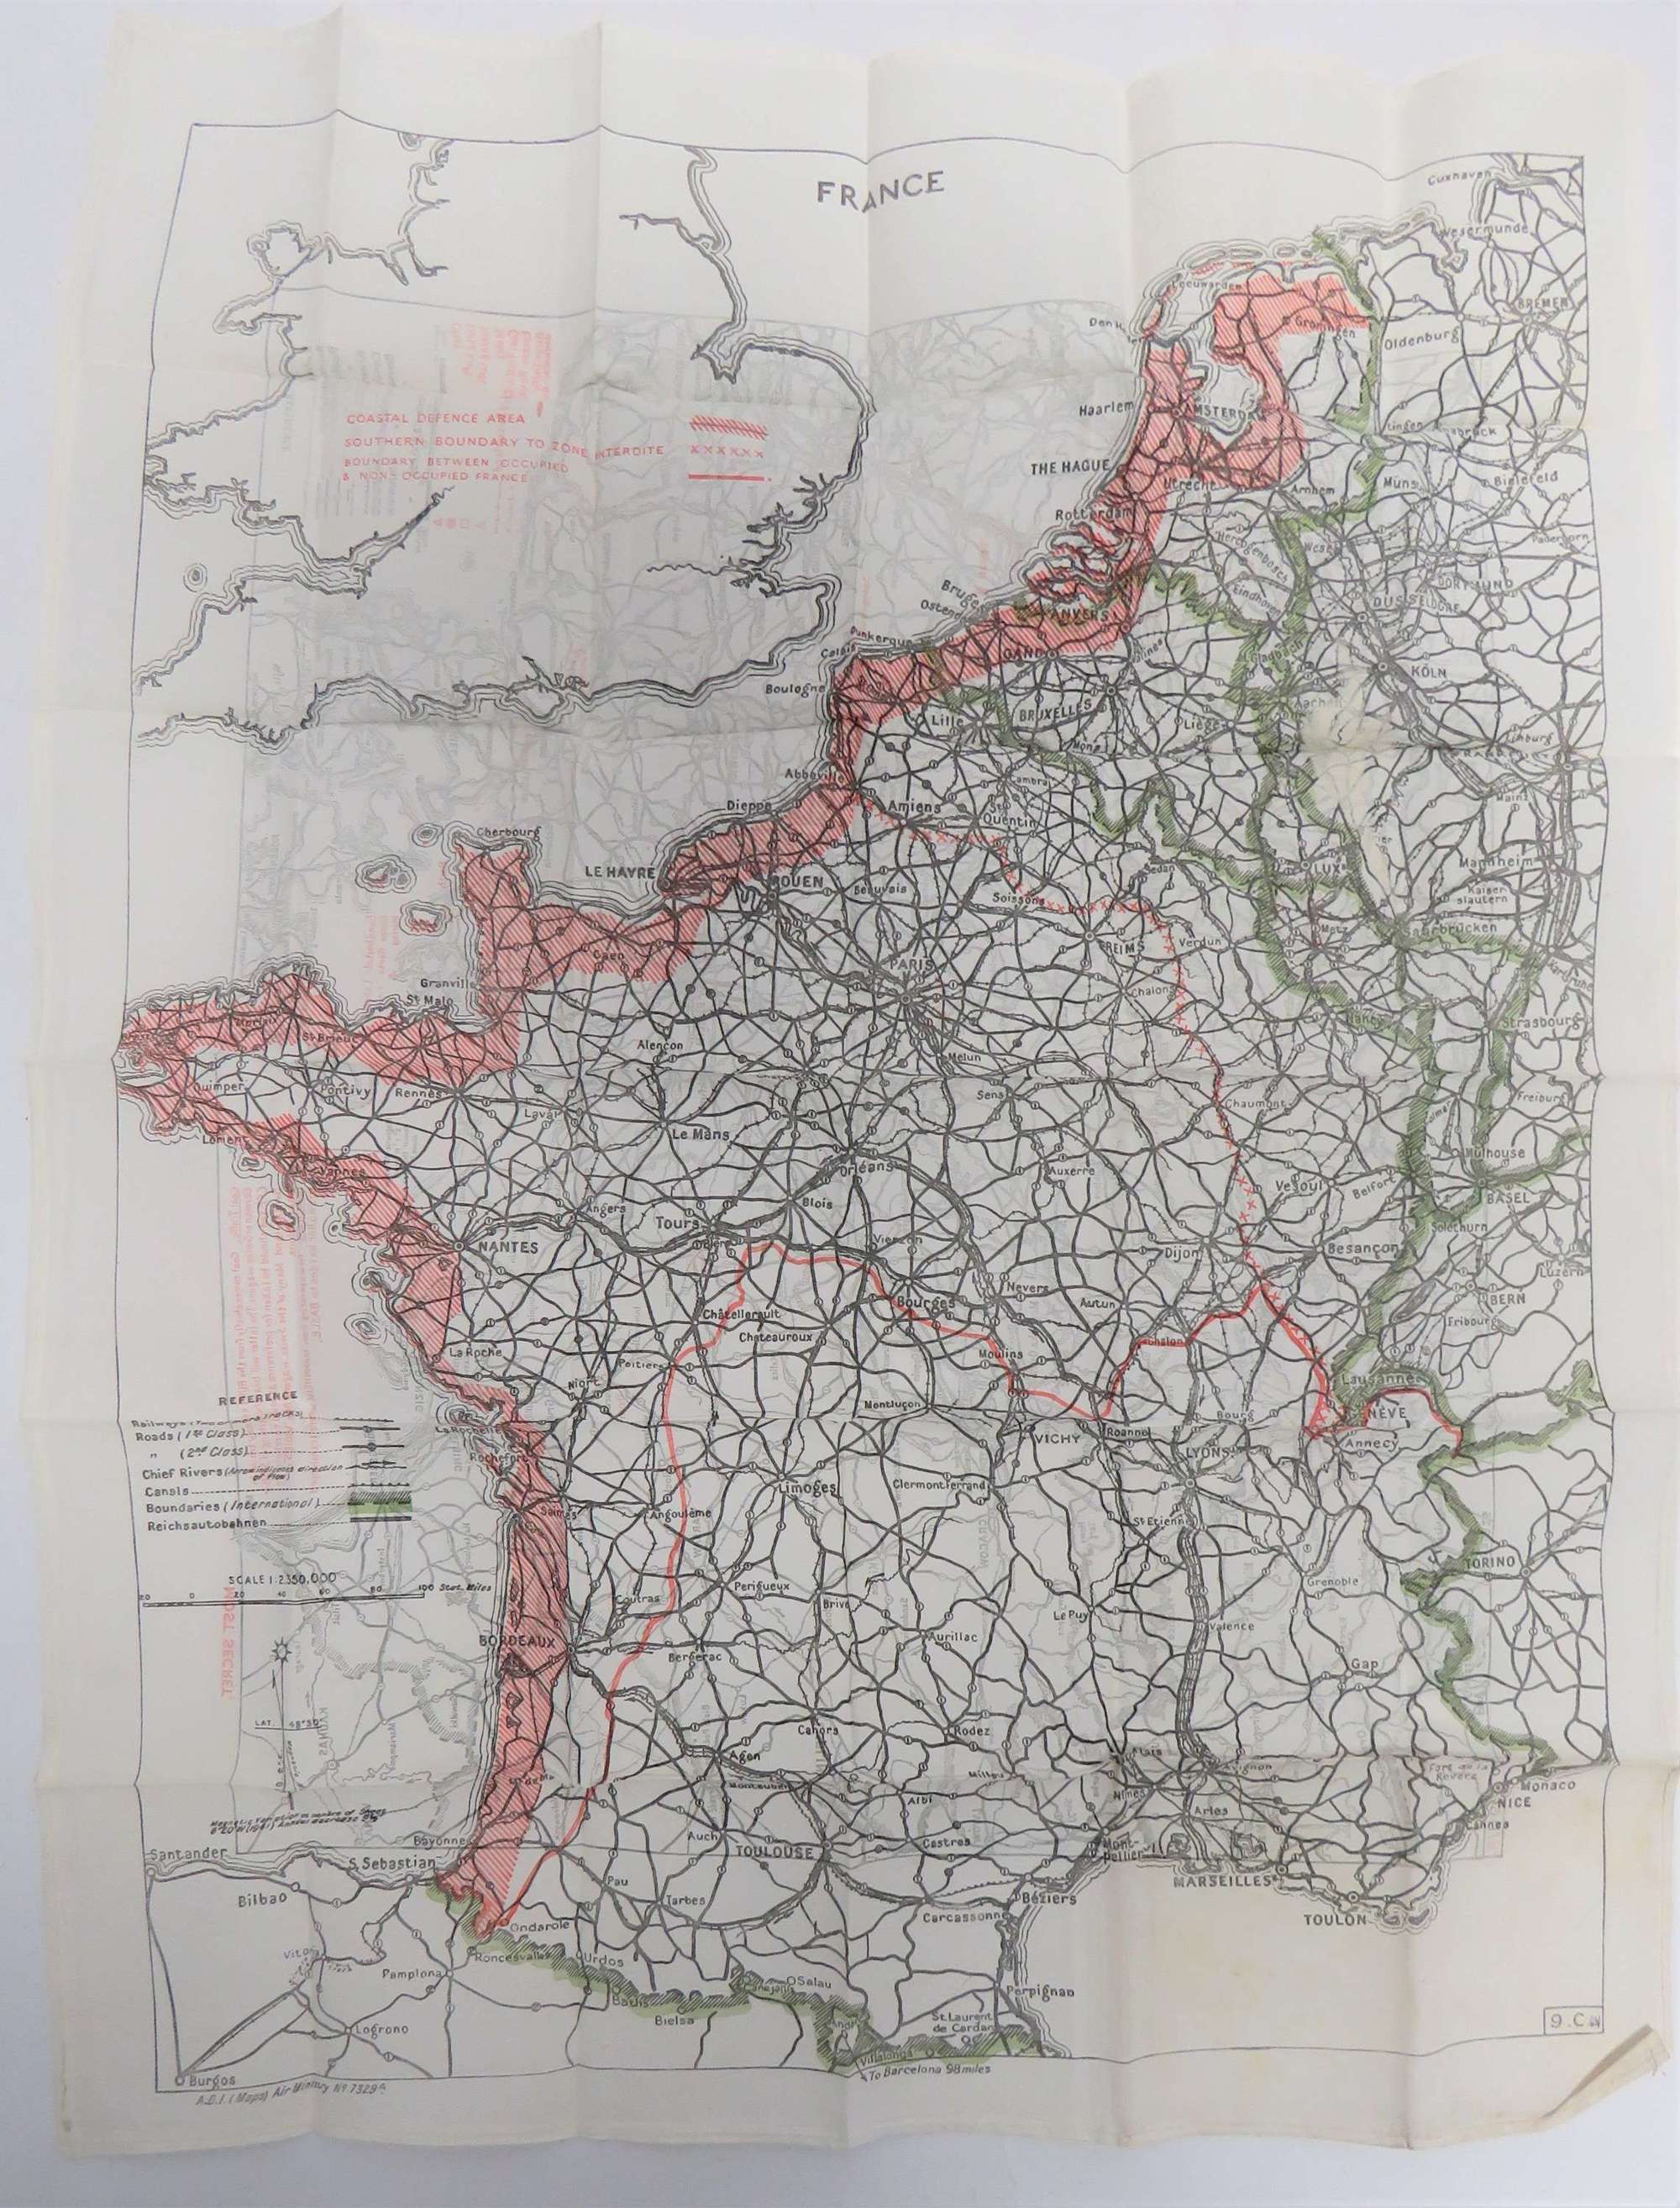 World War 2 Double Sided Silk Escape Map of France and Germany